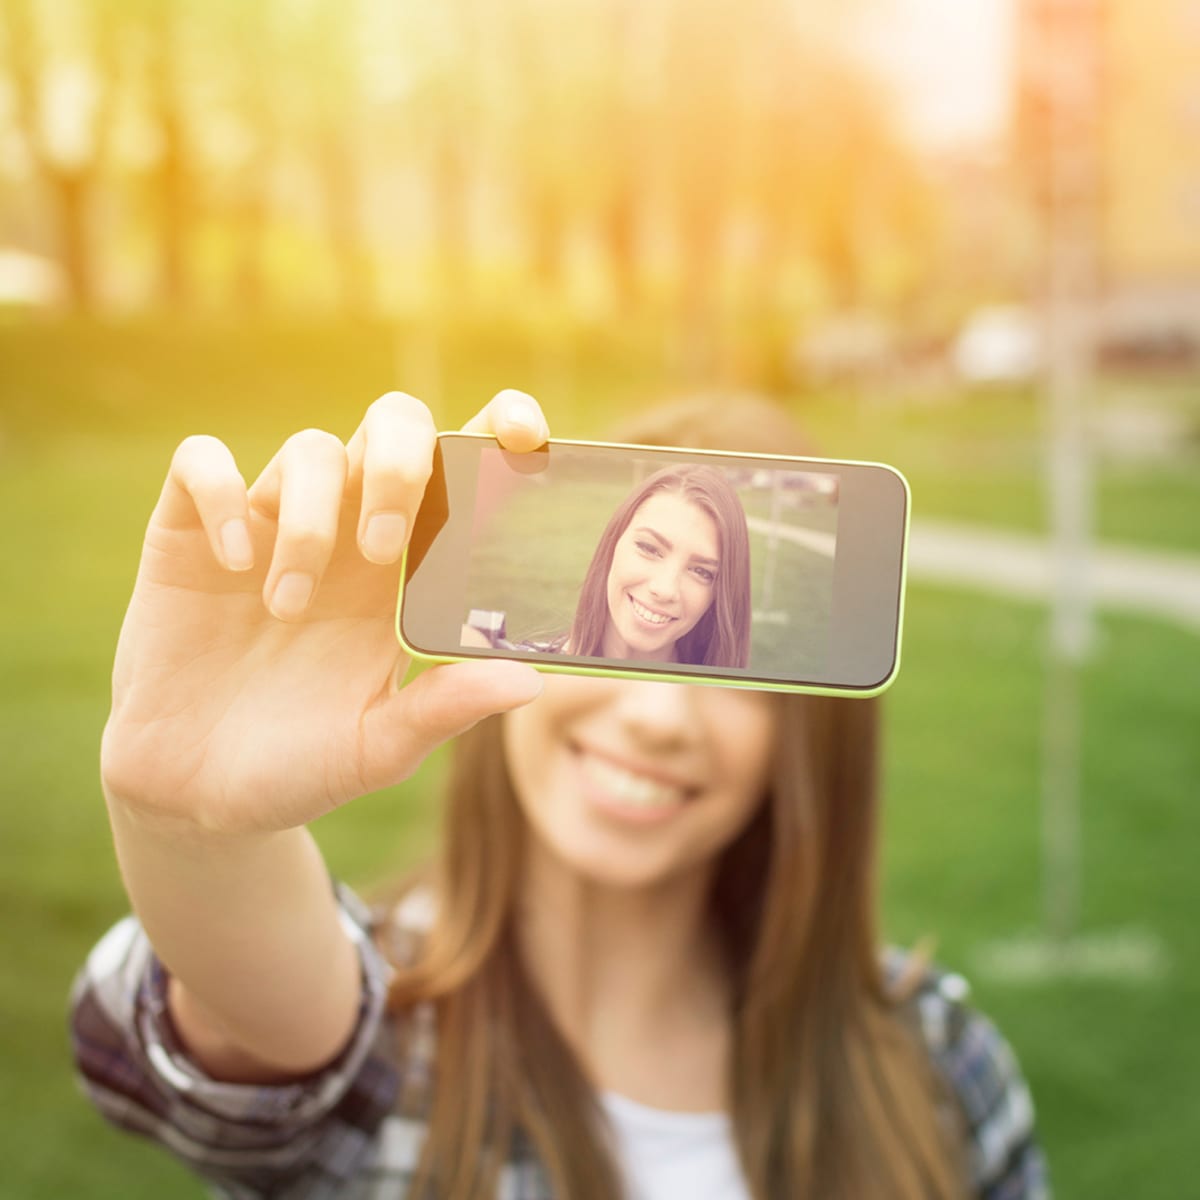 How to Invest In Selfie Generation - TheStreet